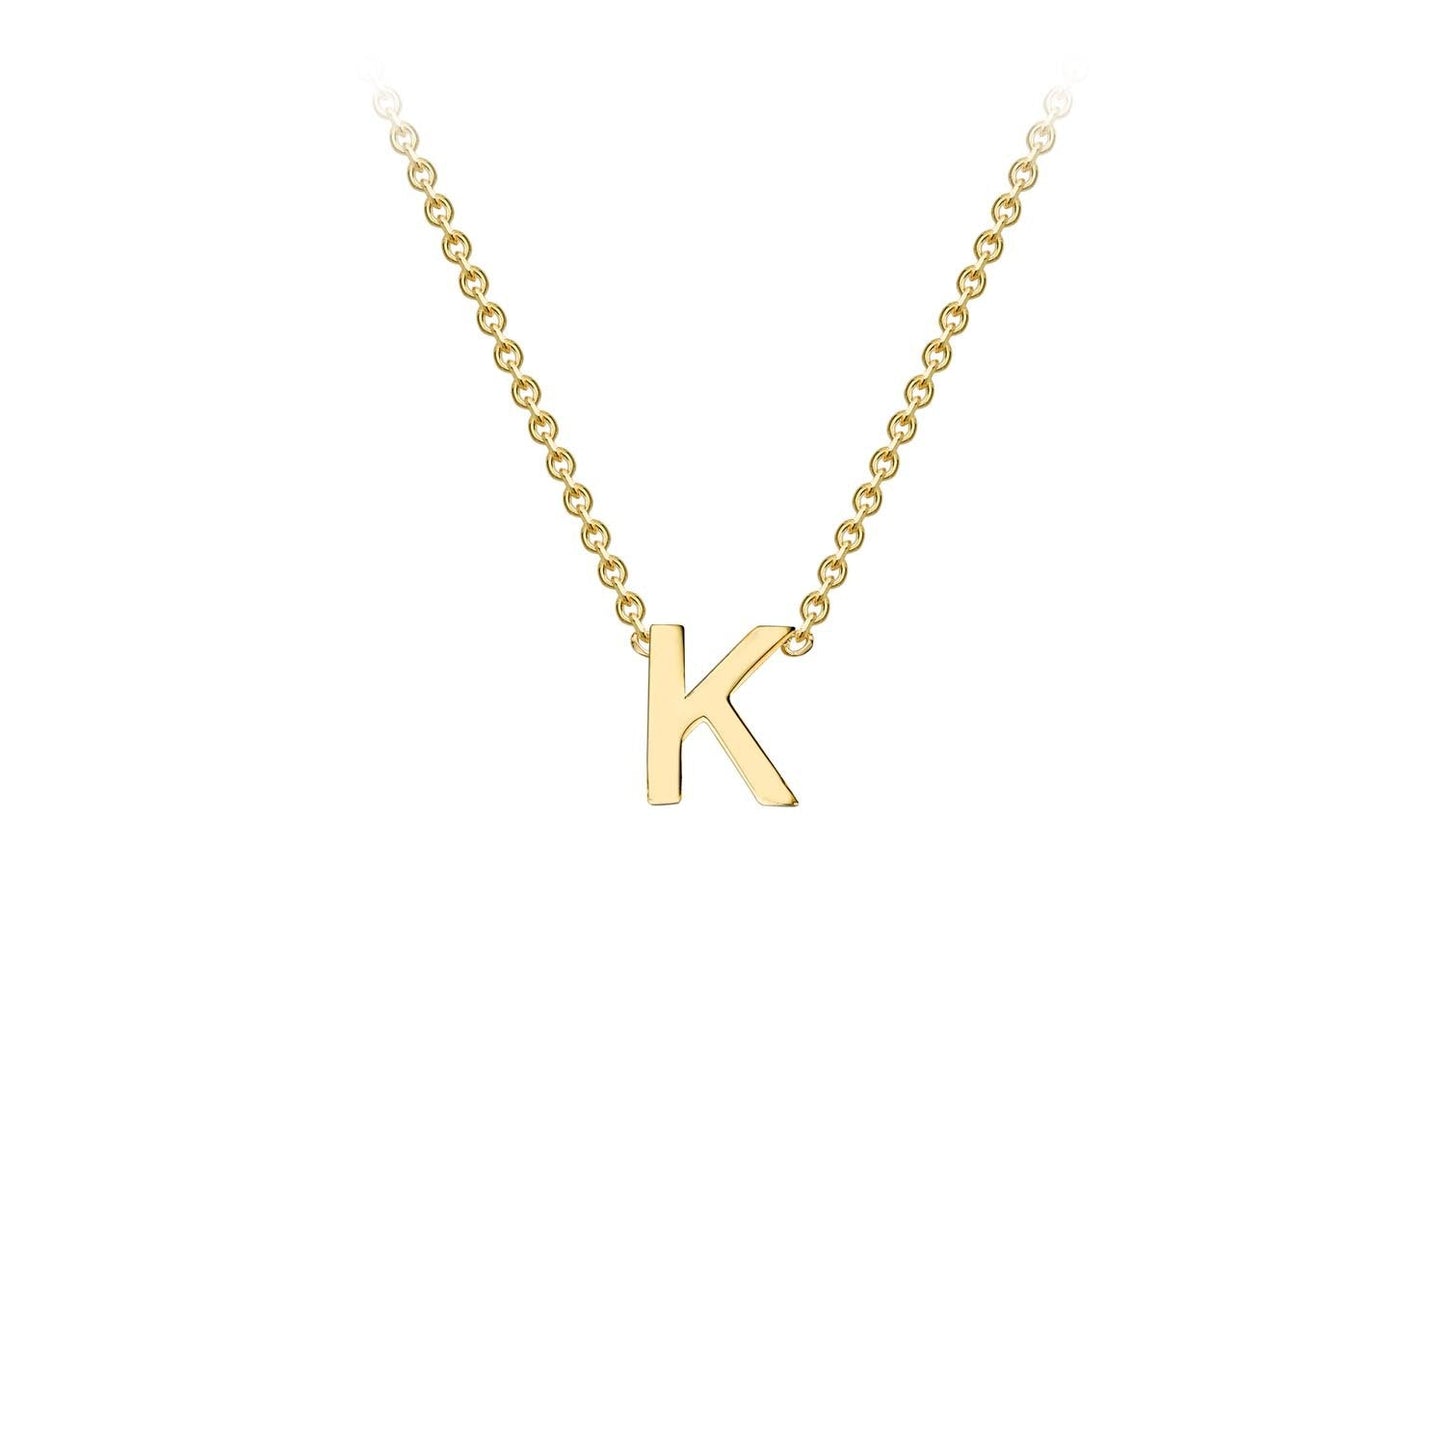 9K Yellow Gold 'K' Initial Adjustable Letter Necklace 38/43cm